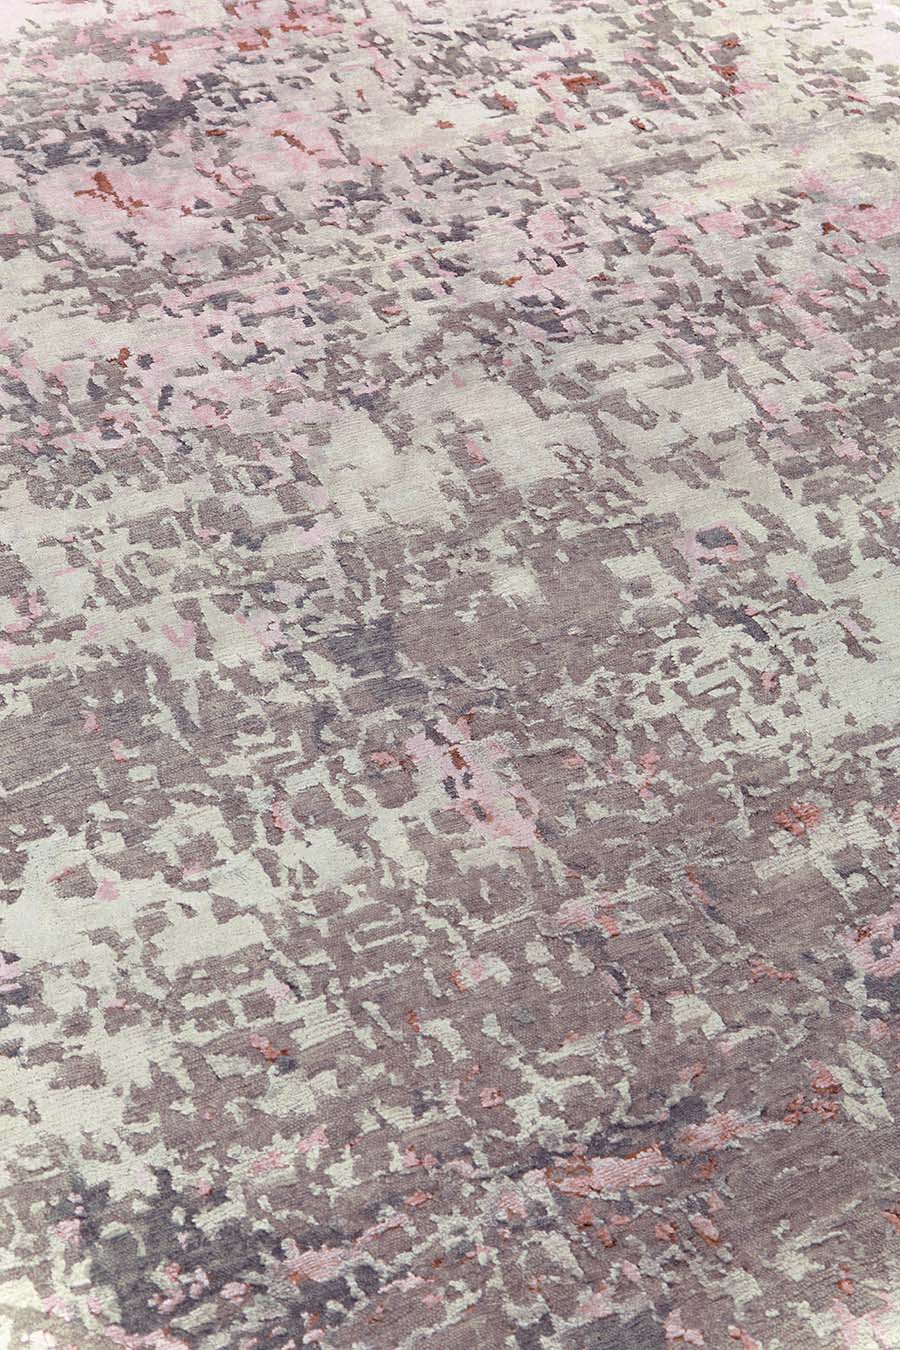 Detailed image of textured Midas handknot rug in silver and pink colour